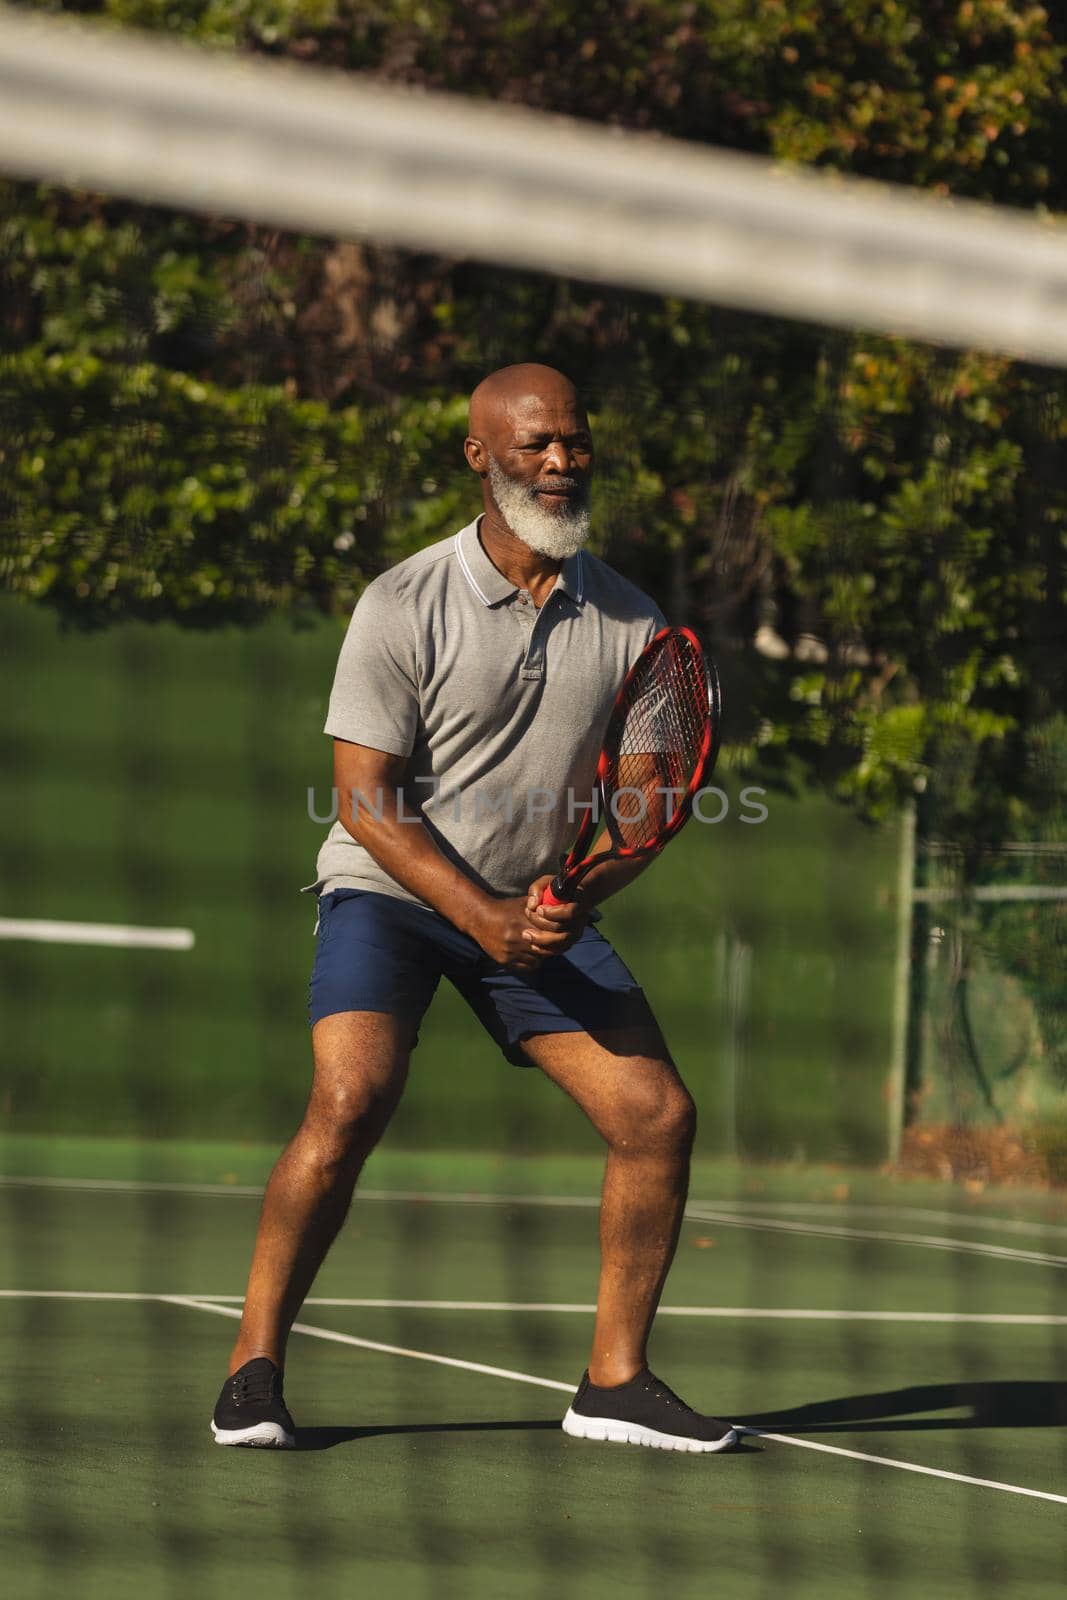 Senior african american man playing tennis on tennis court. retirement and active senior lifestyle concept.